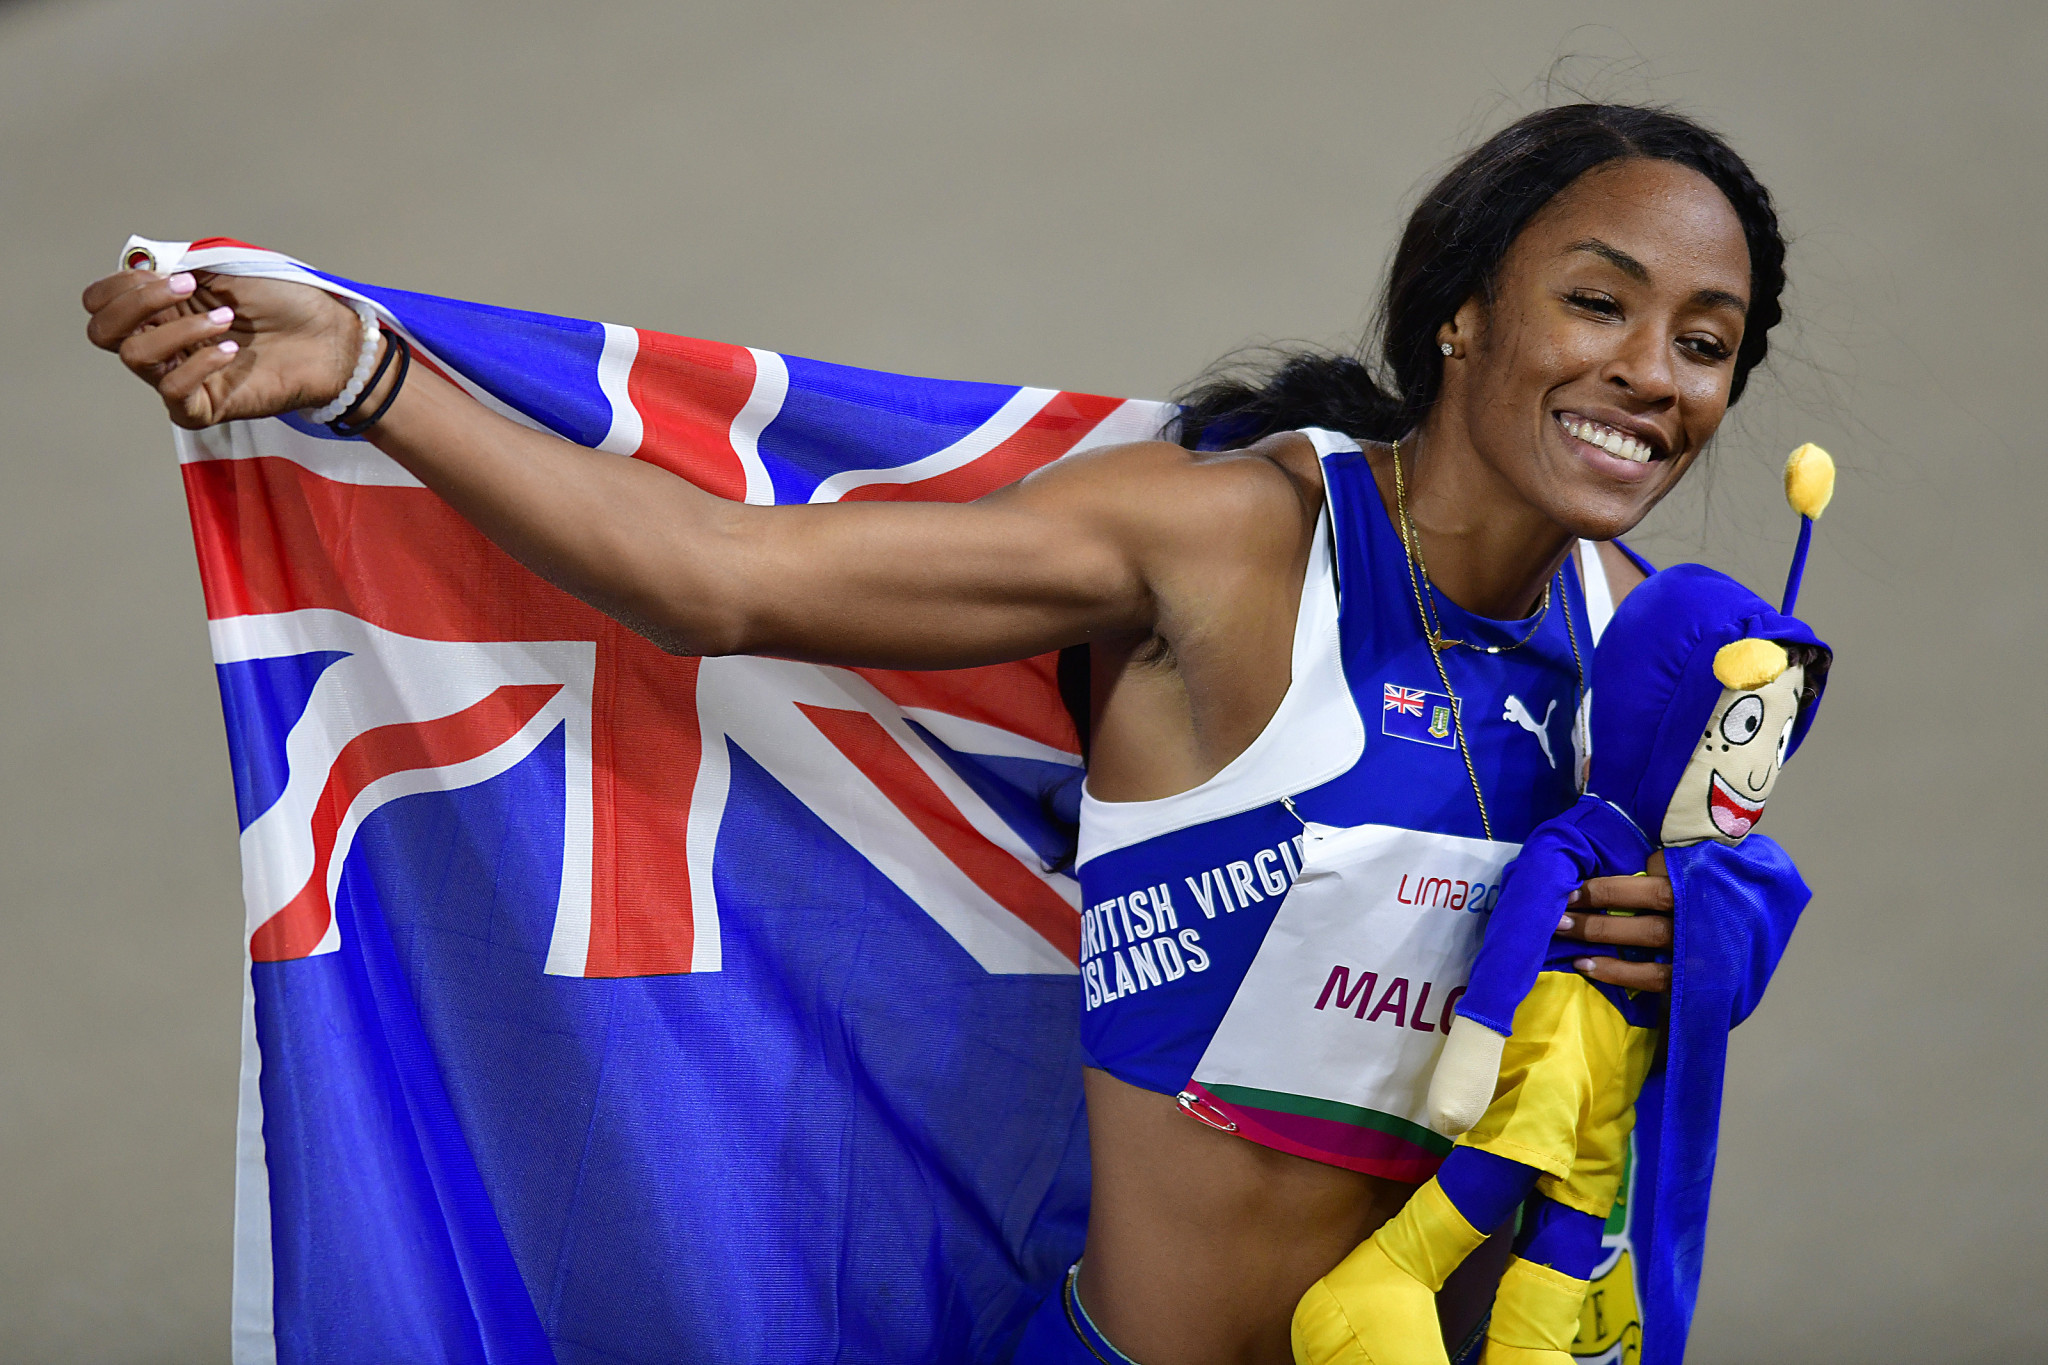 Chantel Malone won the long jump title at the 2019 Pan American Games in Lima ©Getty Images